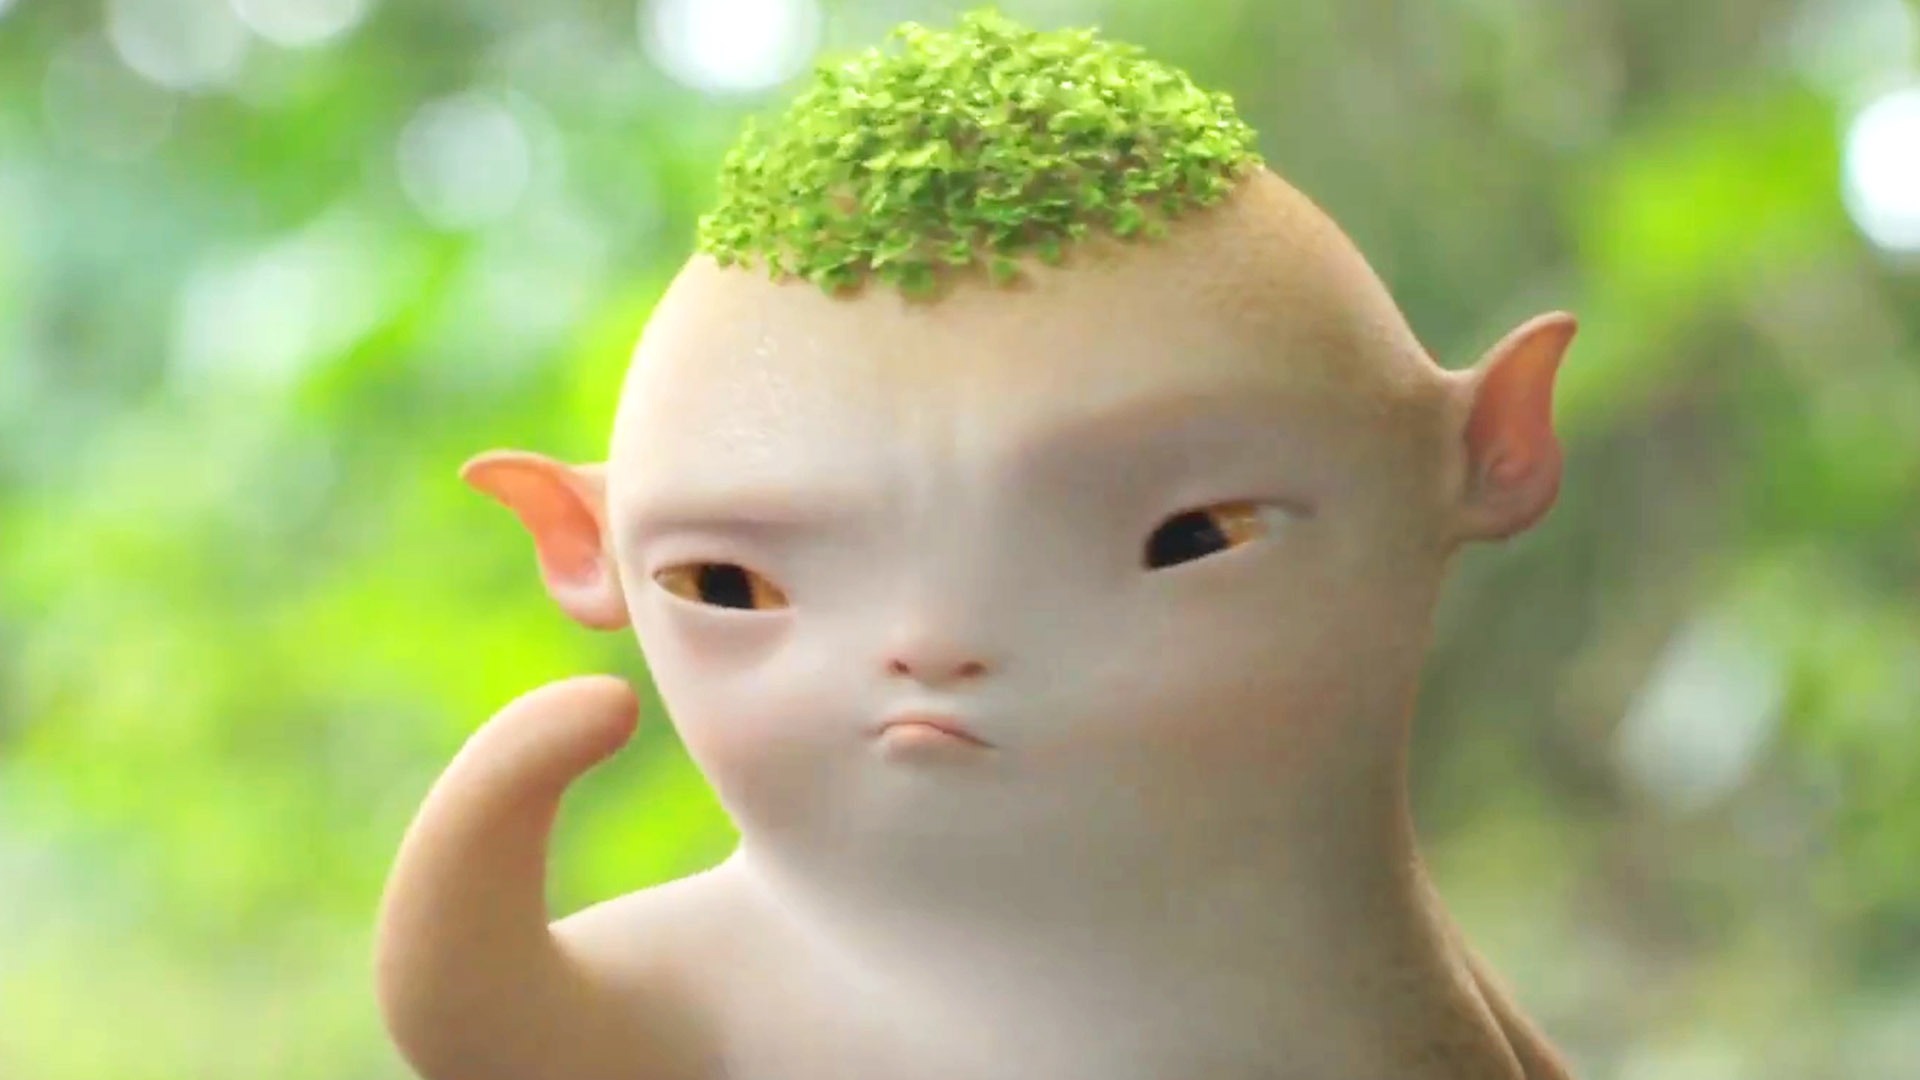 Monster Hunt 2' Review: Sweet, Silly, Inevitable Hit Sequel